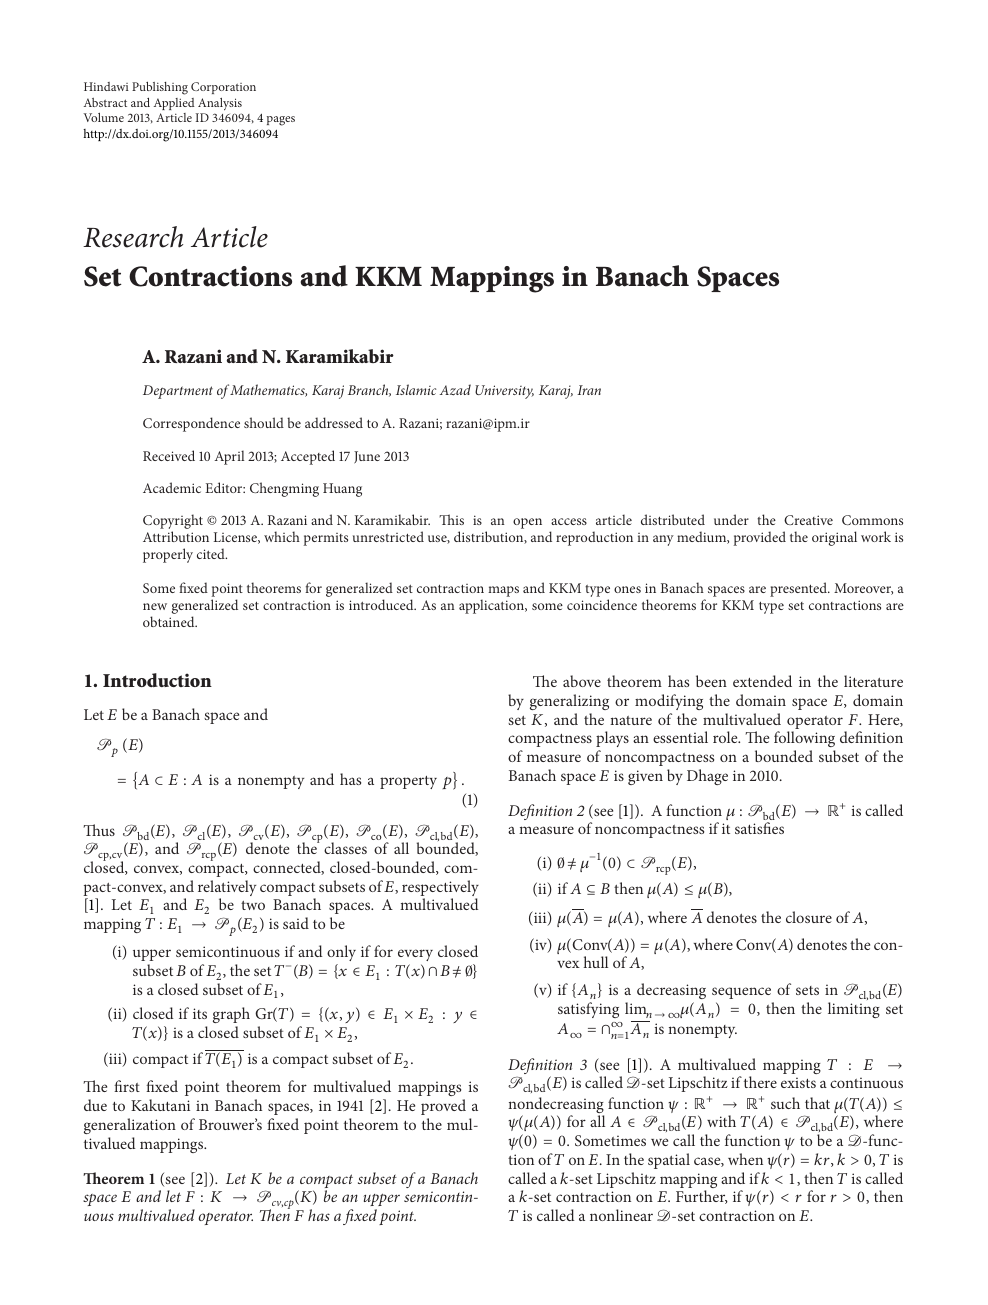 Set Contractions And Kkm Mappings In Banach Spaces Topic Of Research Paper In Mathematics Download Scholarly Article Pdf And Read For Free On Cyberleninka Open Science Hub